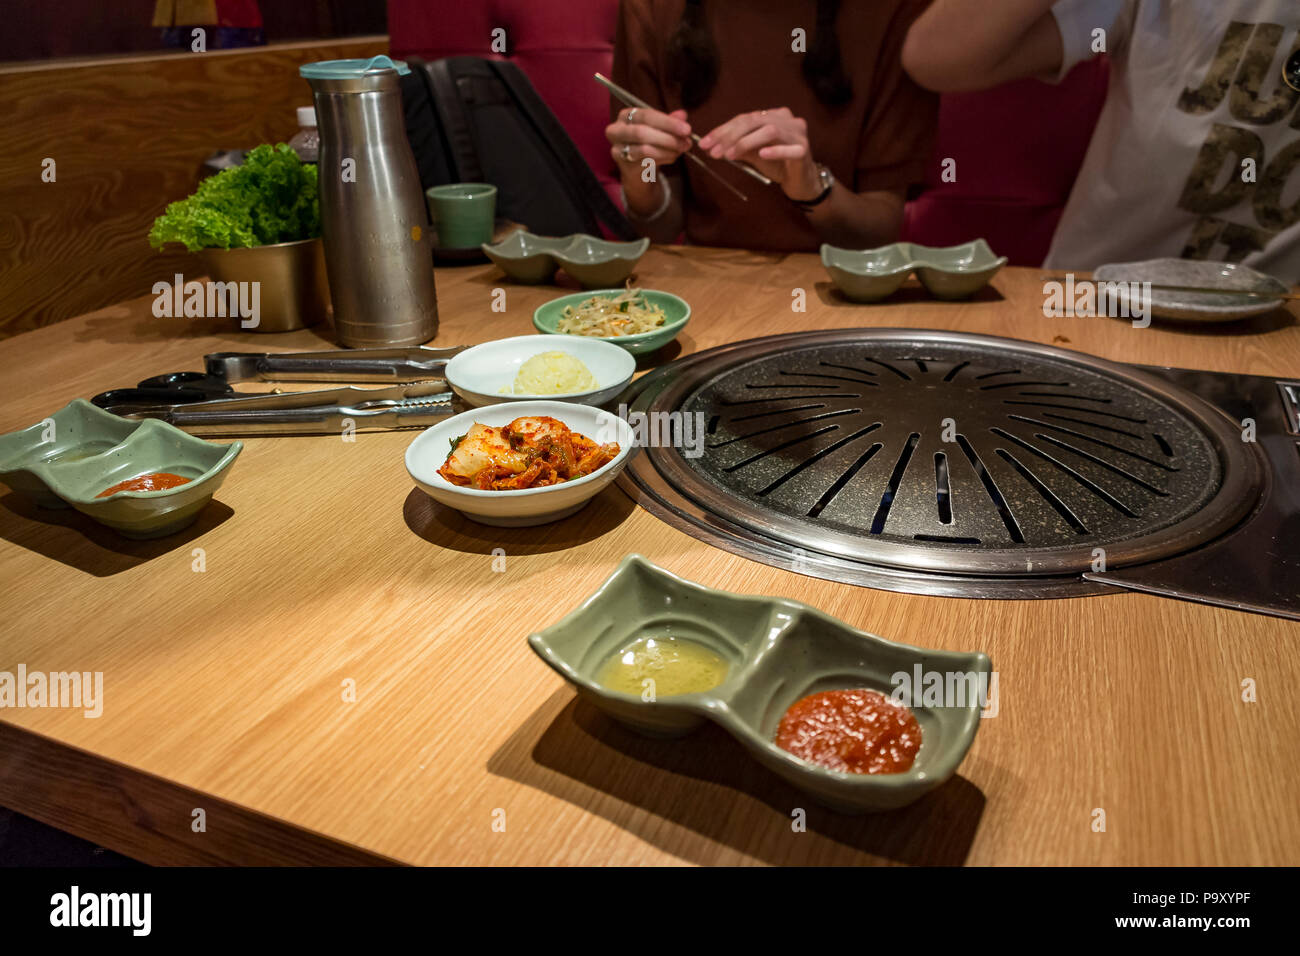 https://c8.alamy.com/comp/P9XYPF/korean-barbecue-bbq-table-with-grill-and-sides-P9XYPF.jpg